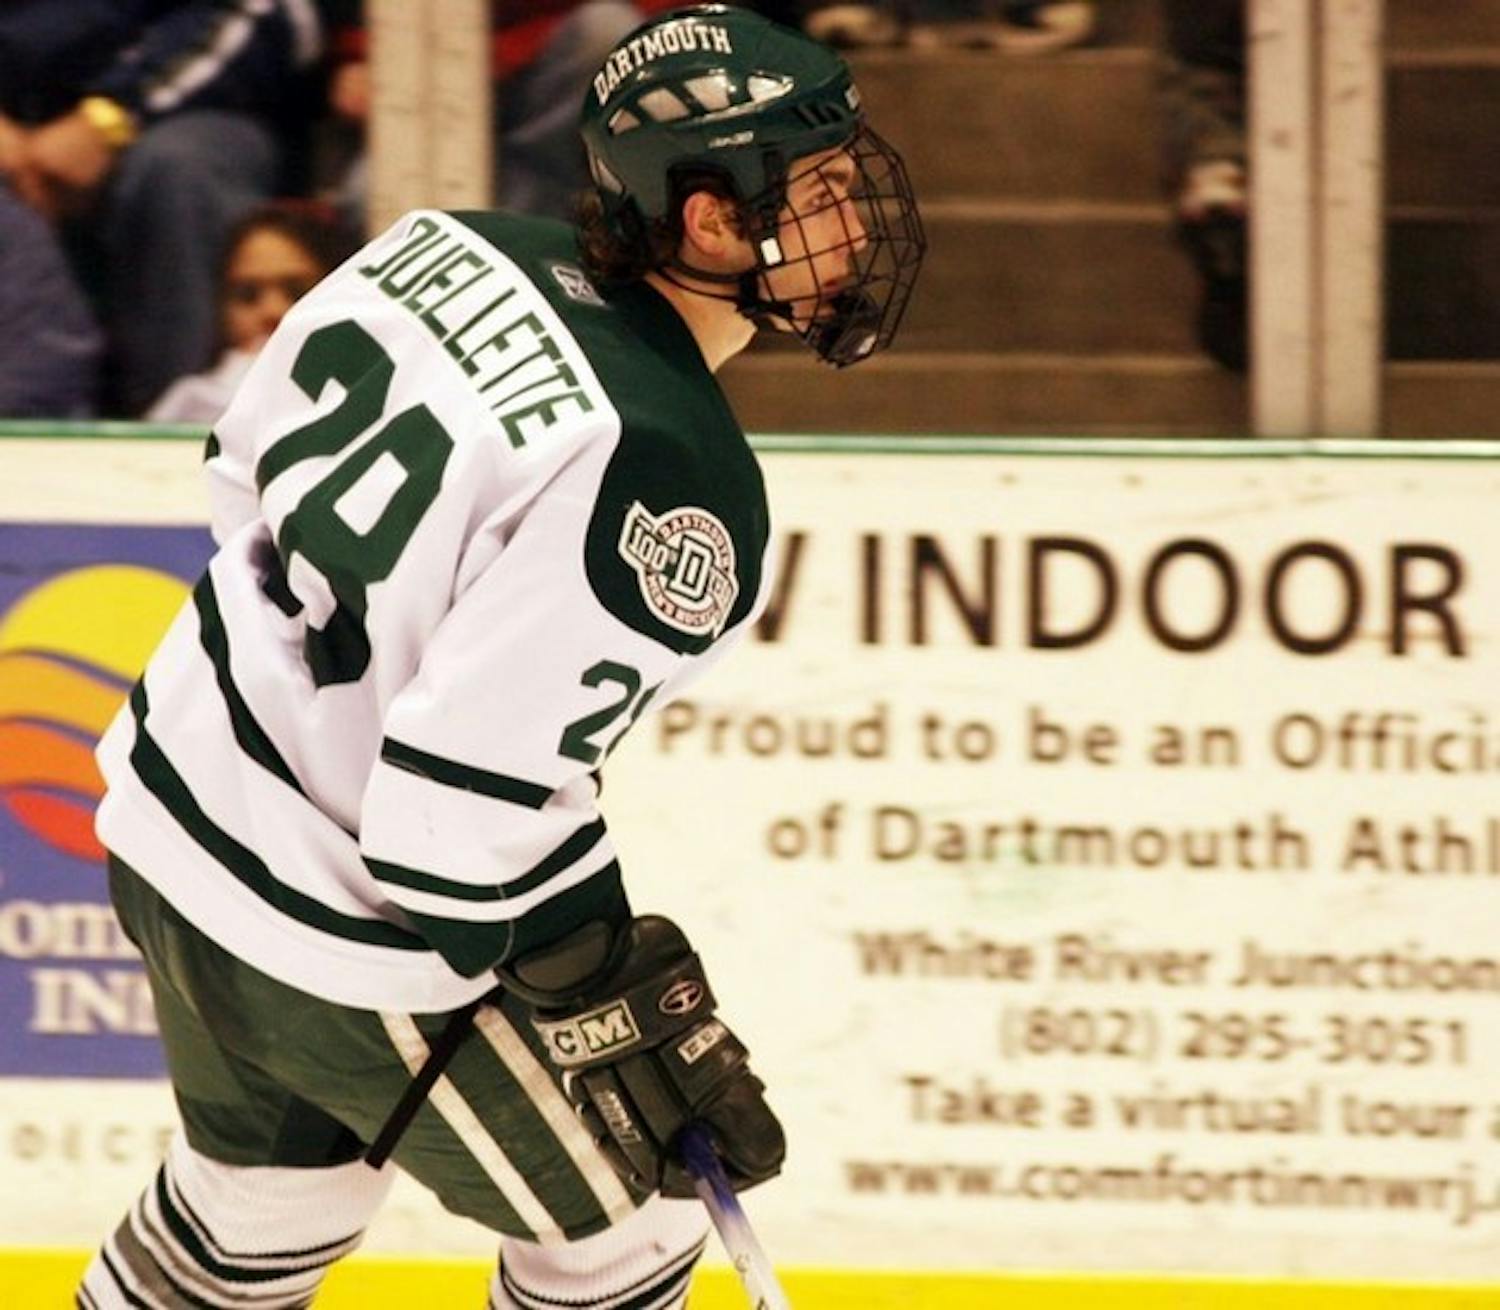 Mike Ouellette '06 tallied 37 points this season to lead the Big Green.